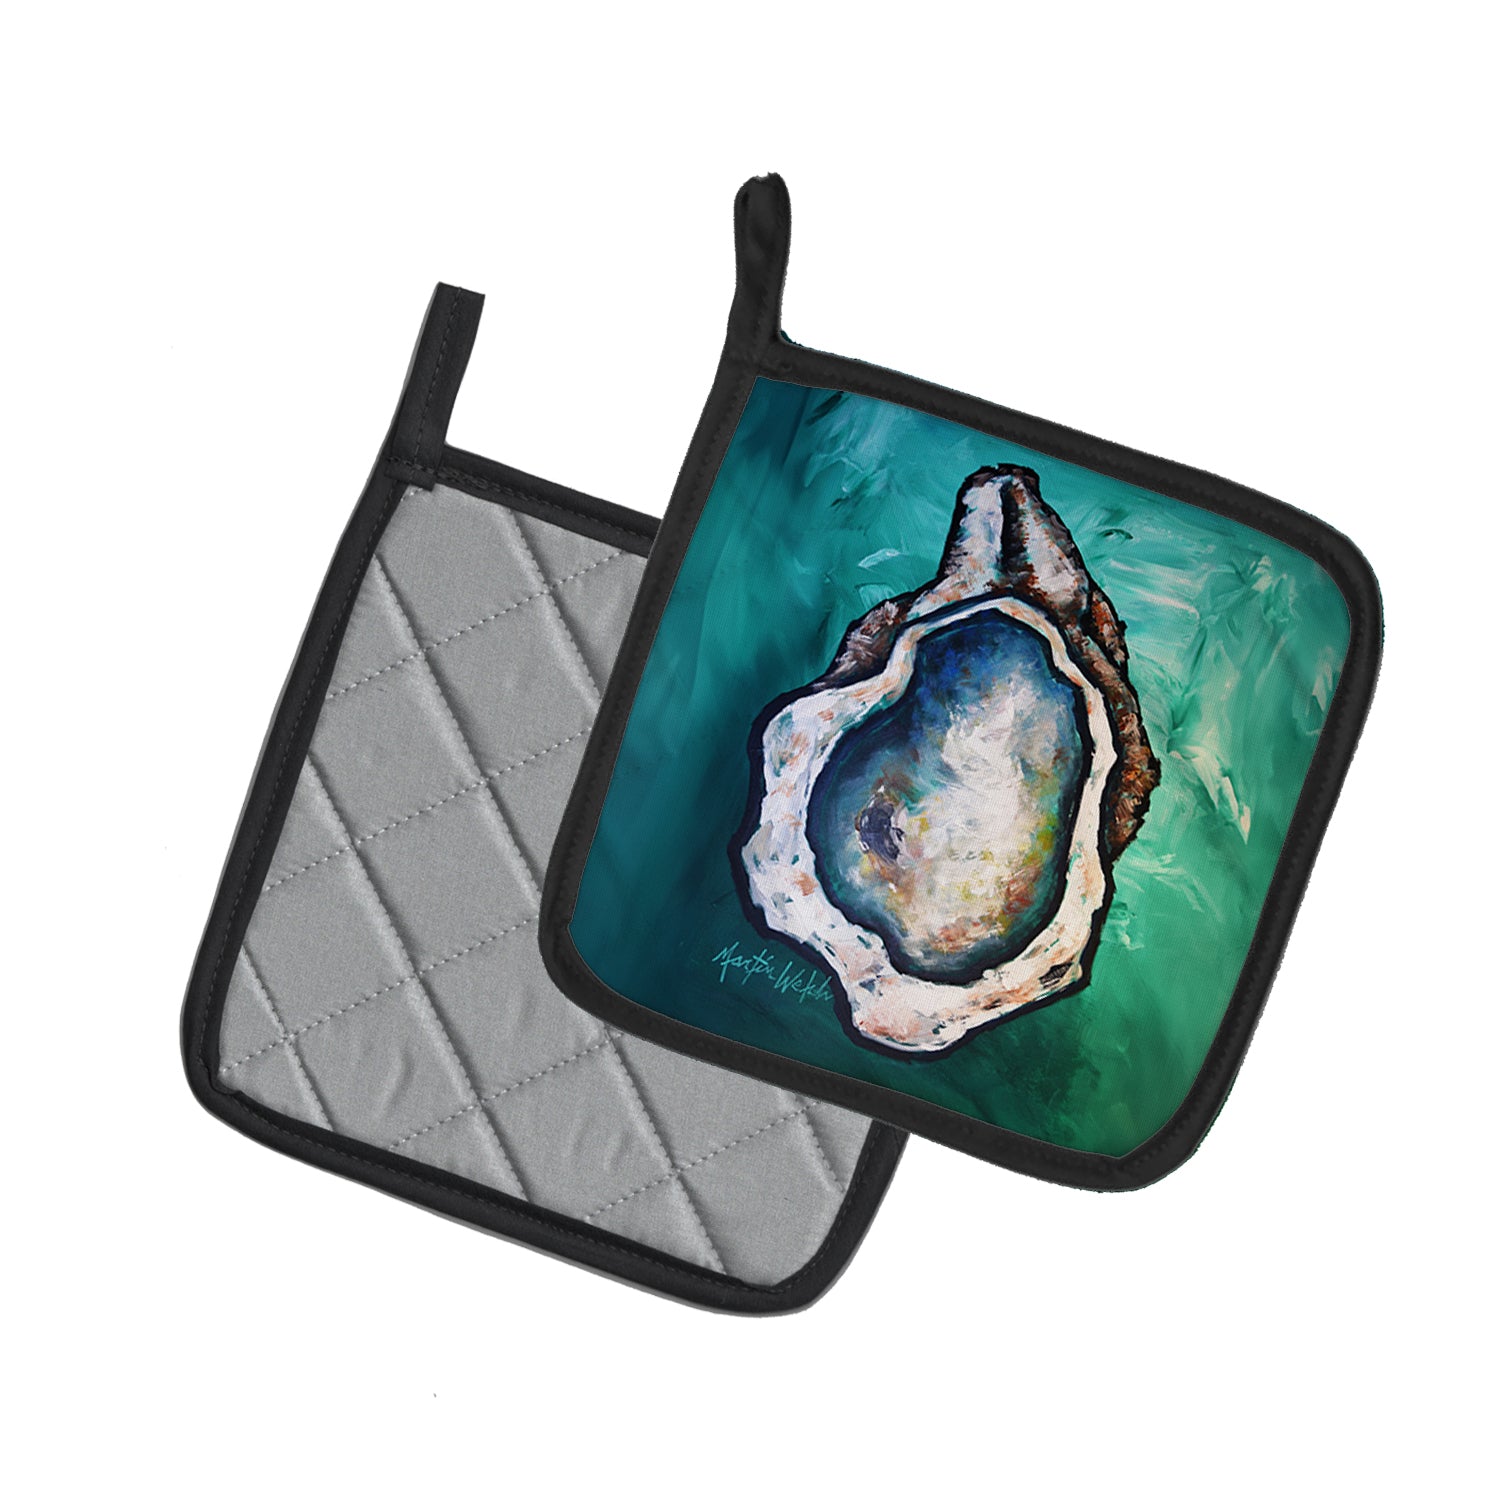 Buy this One Shell Oyster Pair of Pot Holders